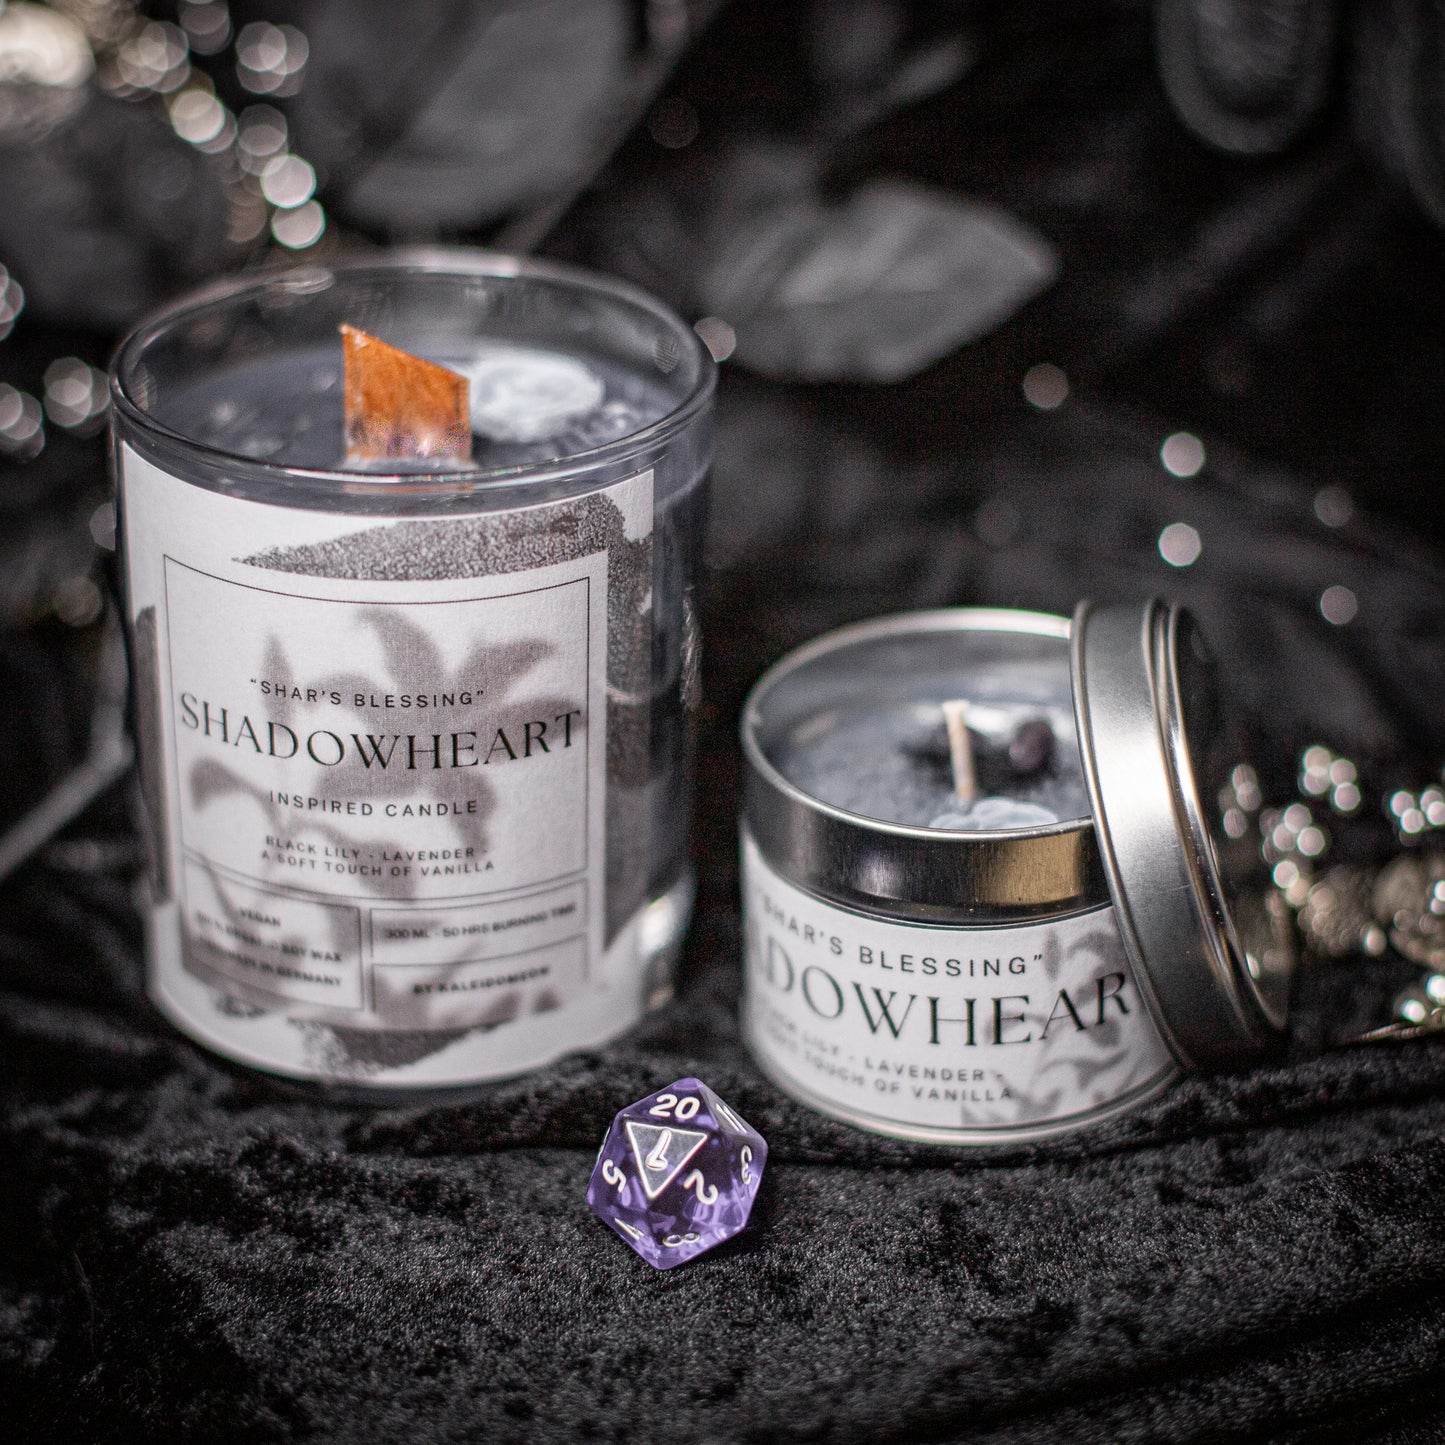 Shadowheart inspired candle - 'Shar's Blessing' Baldurs Gate 3 inspired soy Candles 100ml